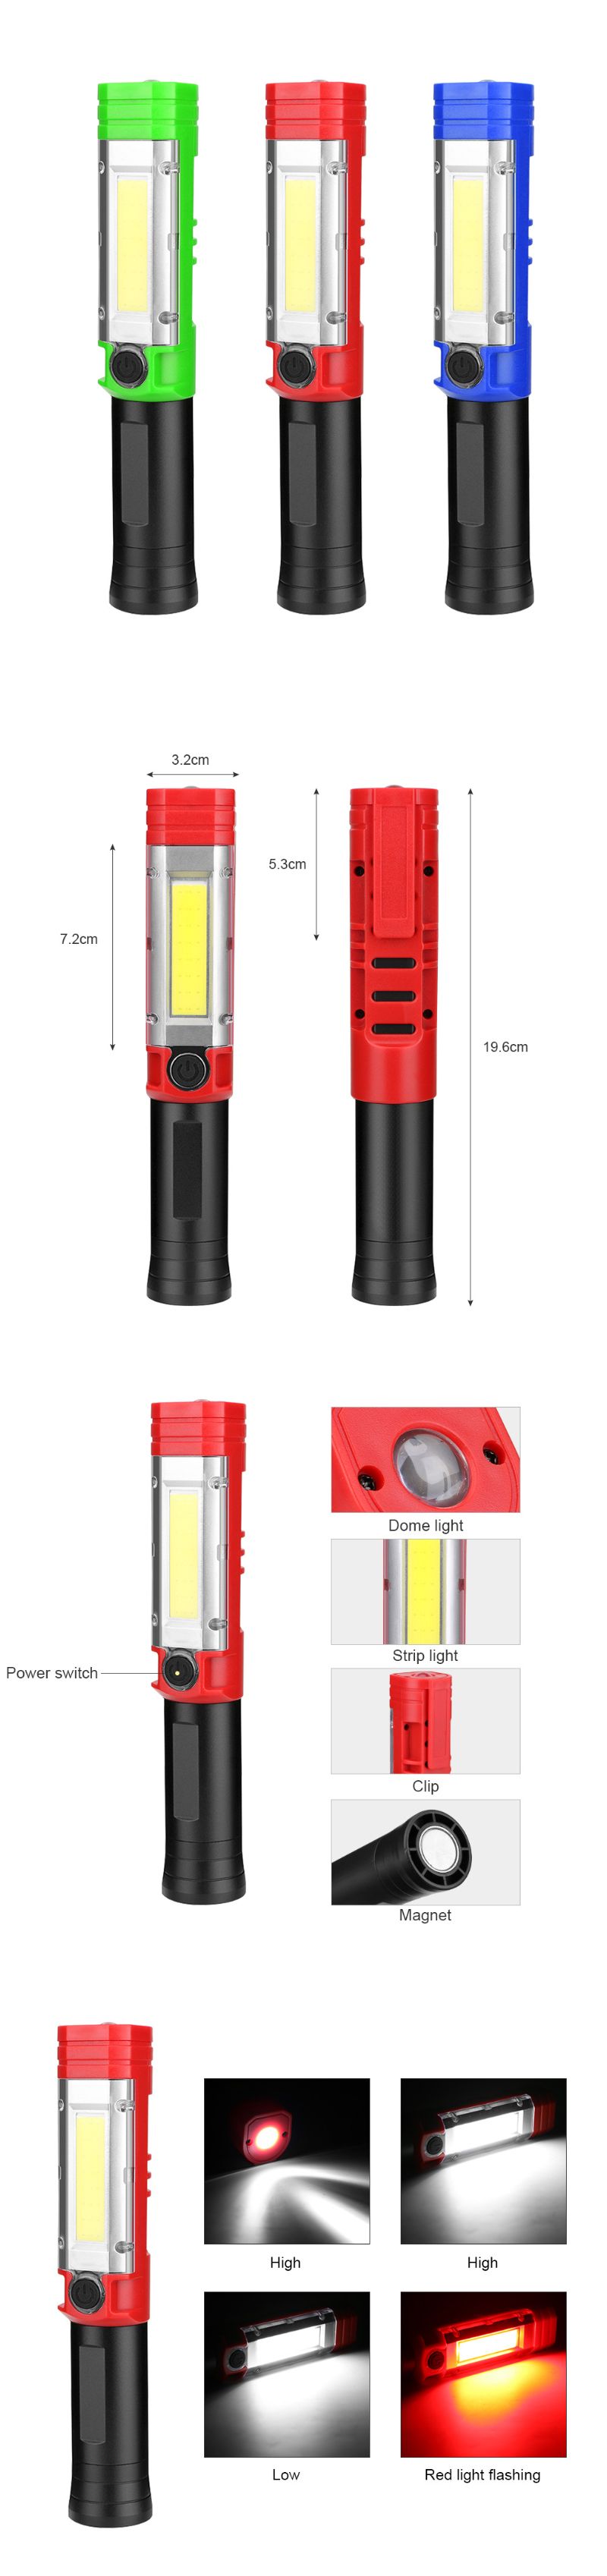 COB-LED-Light-AA-Battery-Flashlight-4-Modes-Magnetic-Attraction-Camping-Hunting-Emergency-Lamp-With--1531323